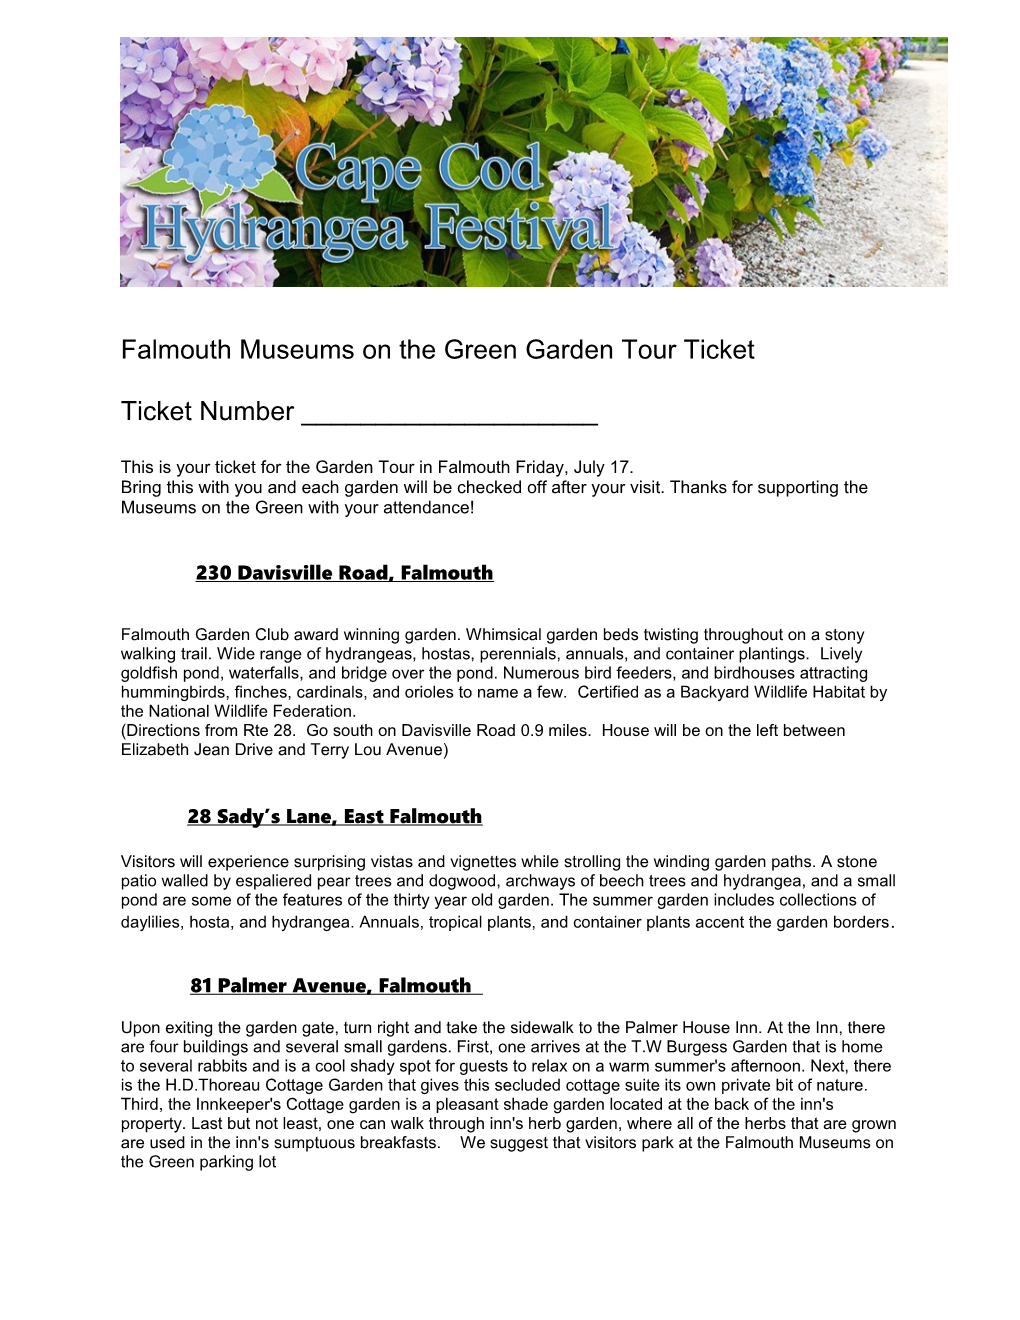 Falmouth Museums on the Greengarden Tour Ticket